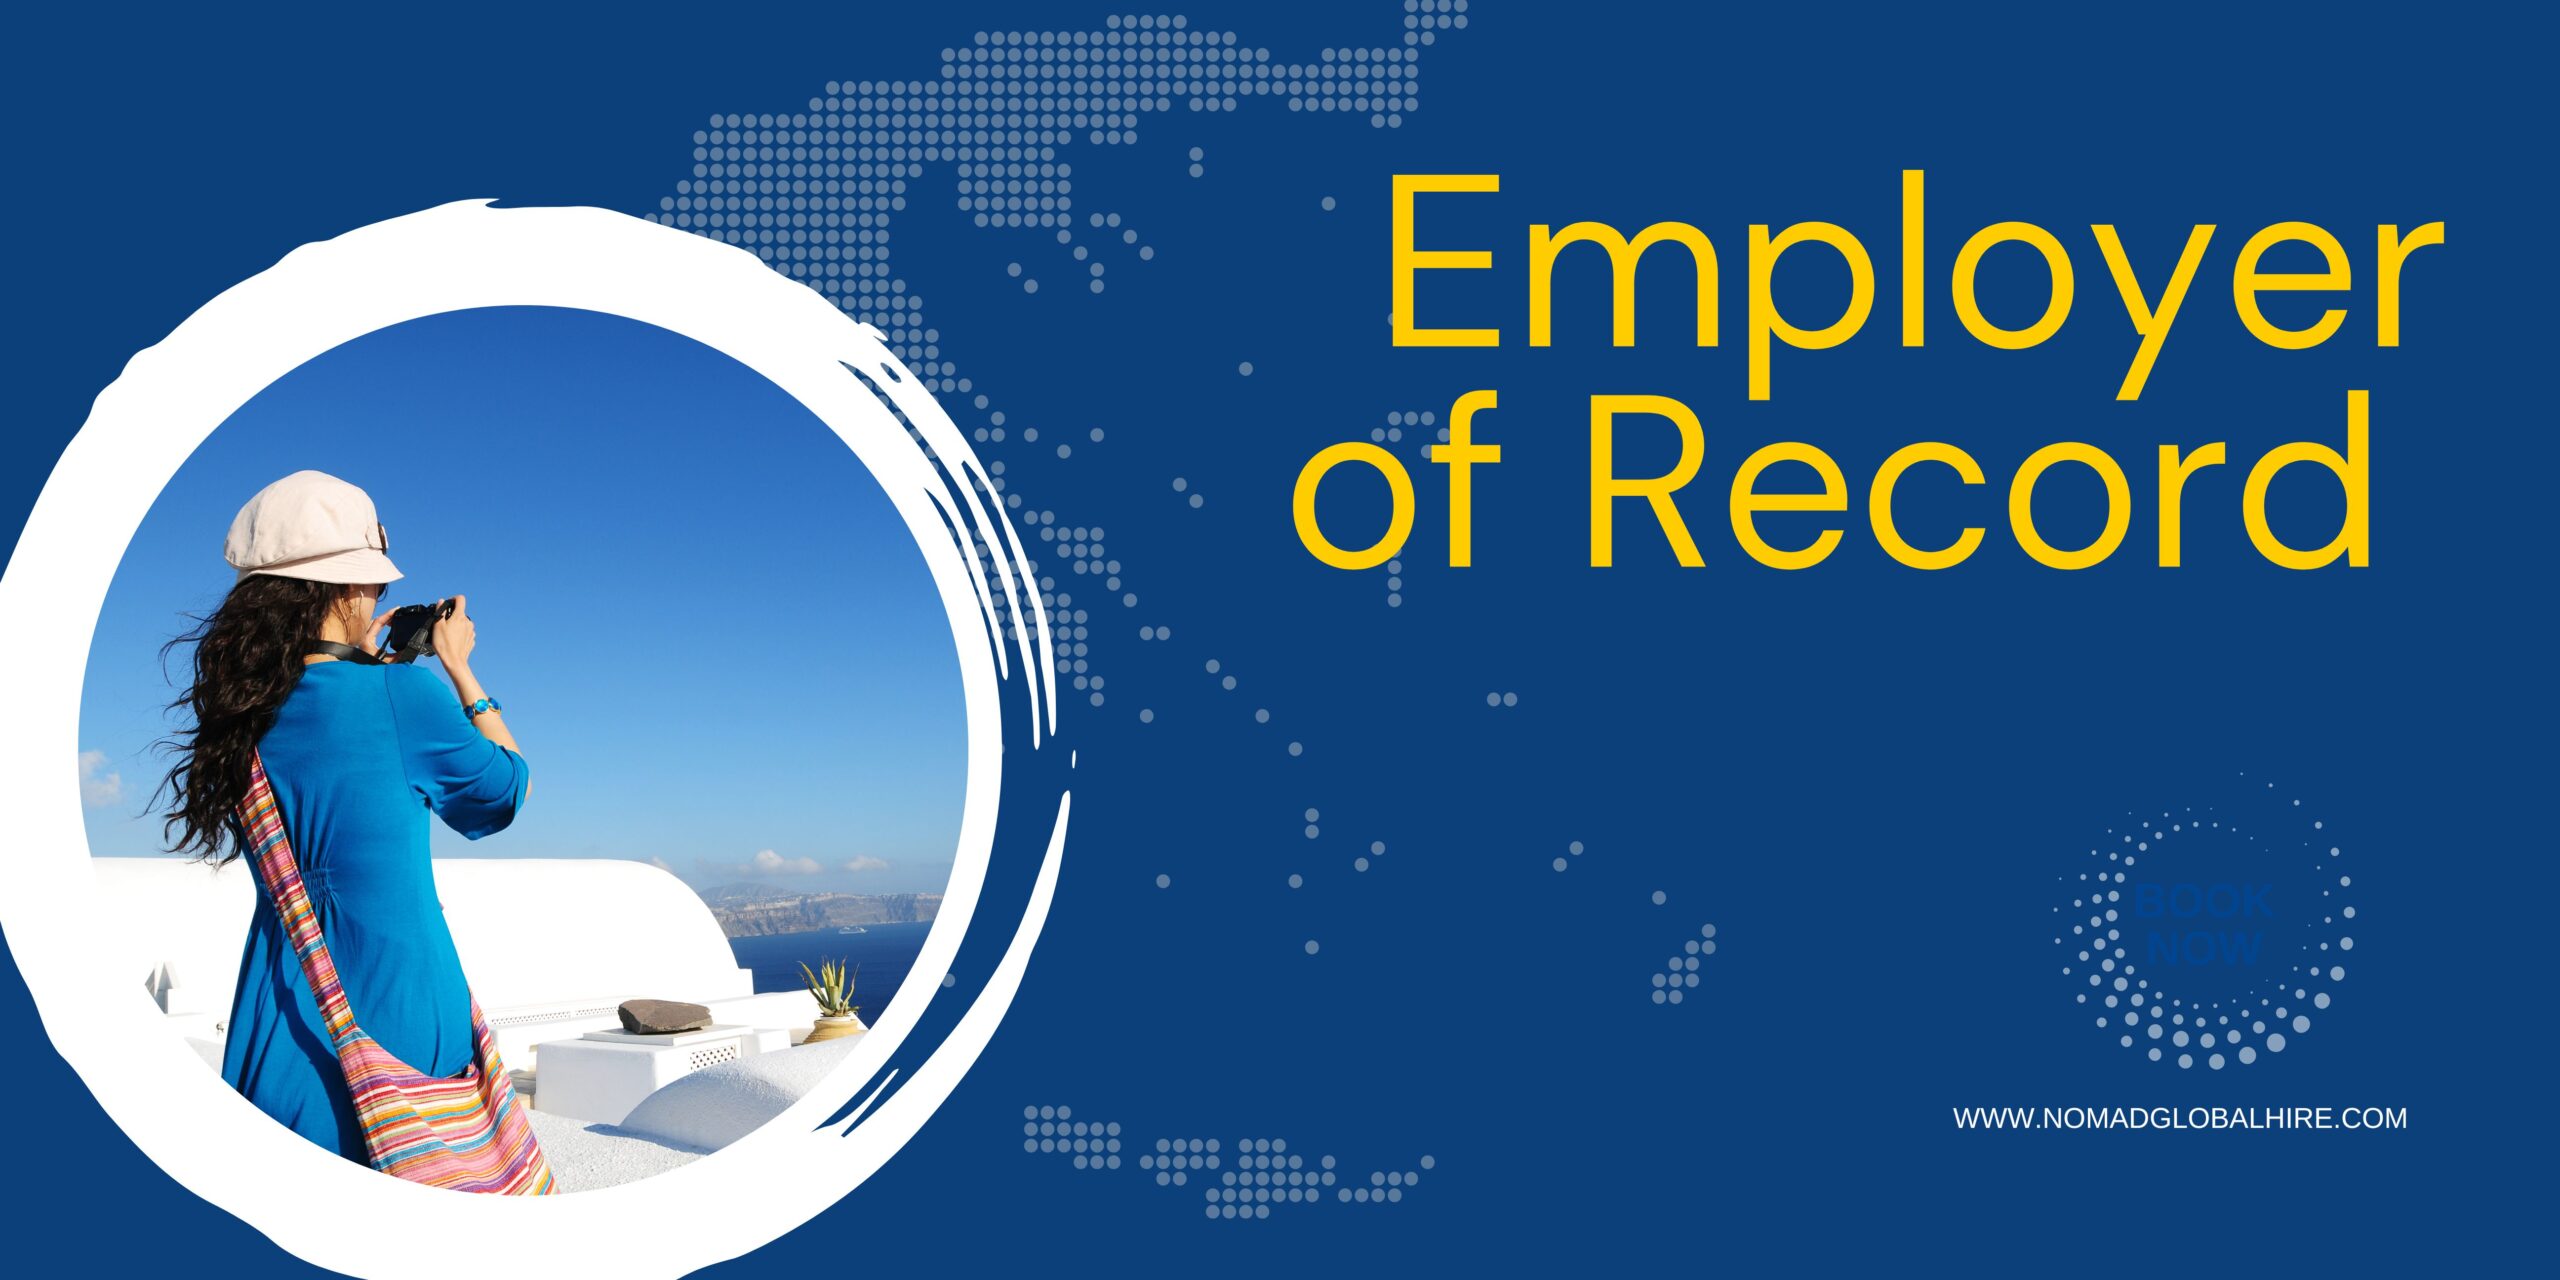 An explanation of the Employer of Record